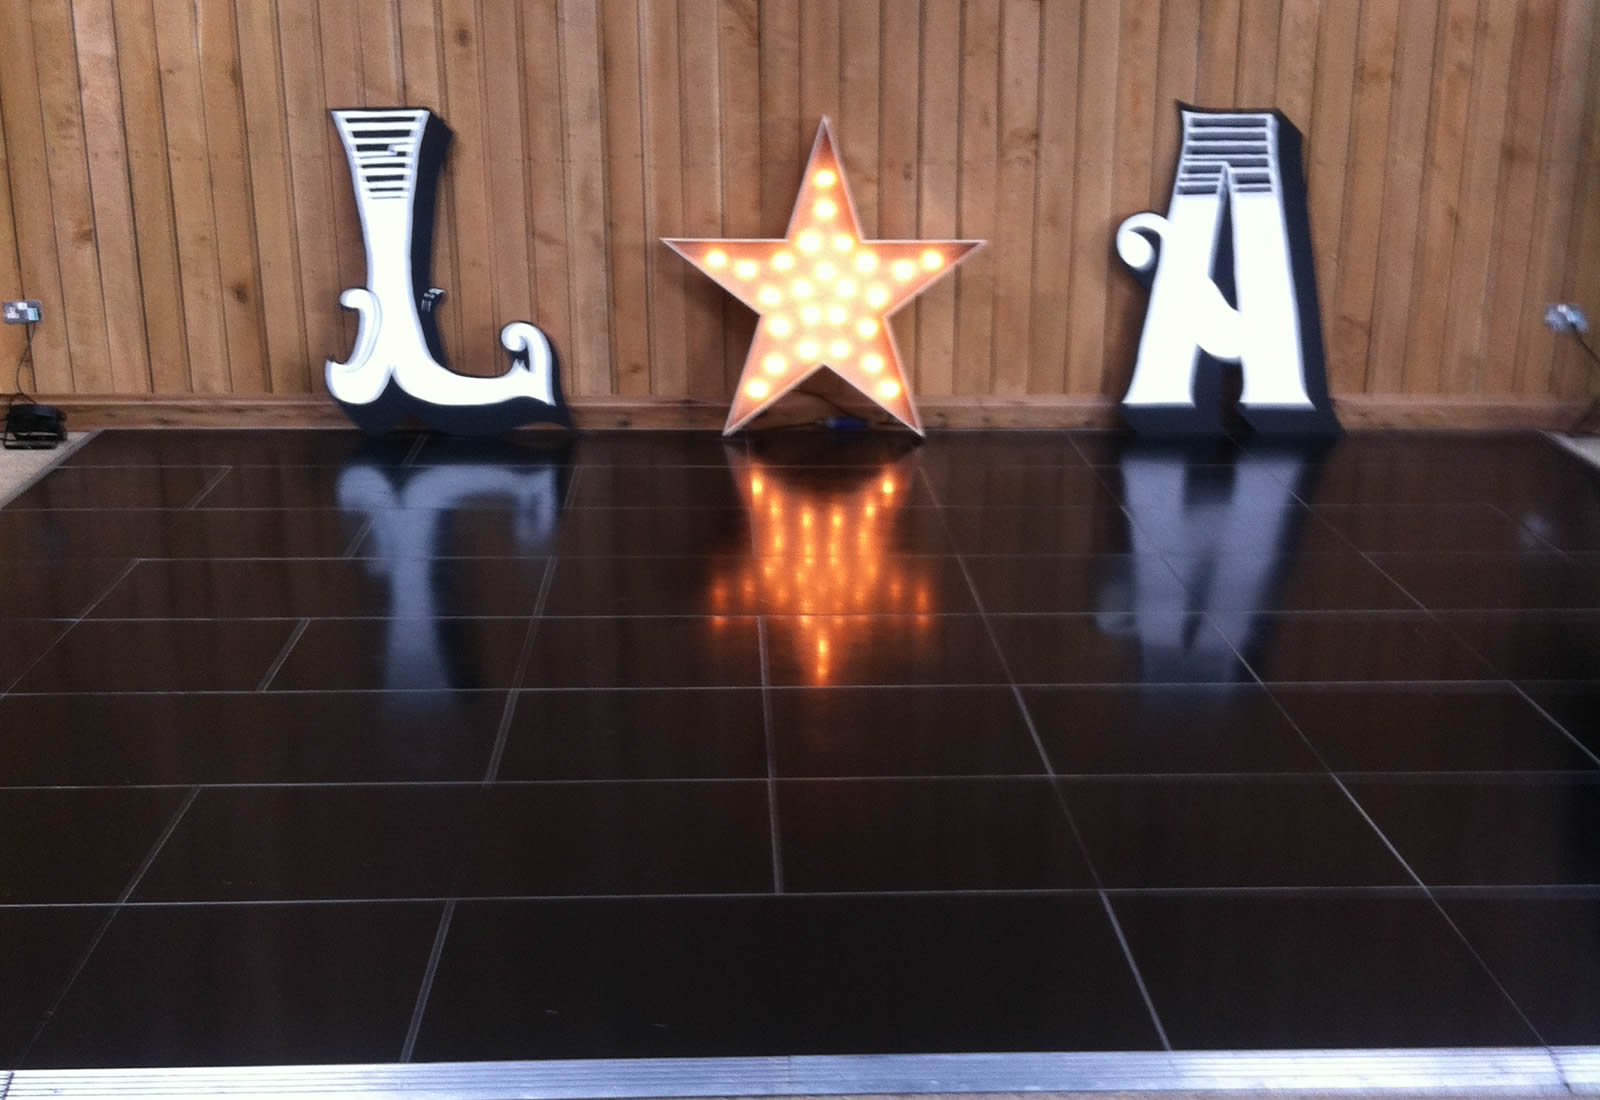 Black dance floor with letters and light up star